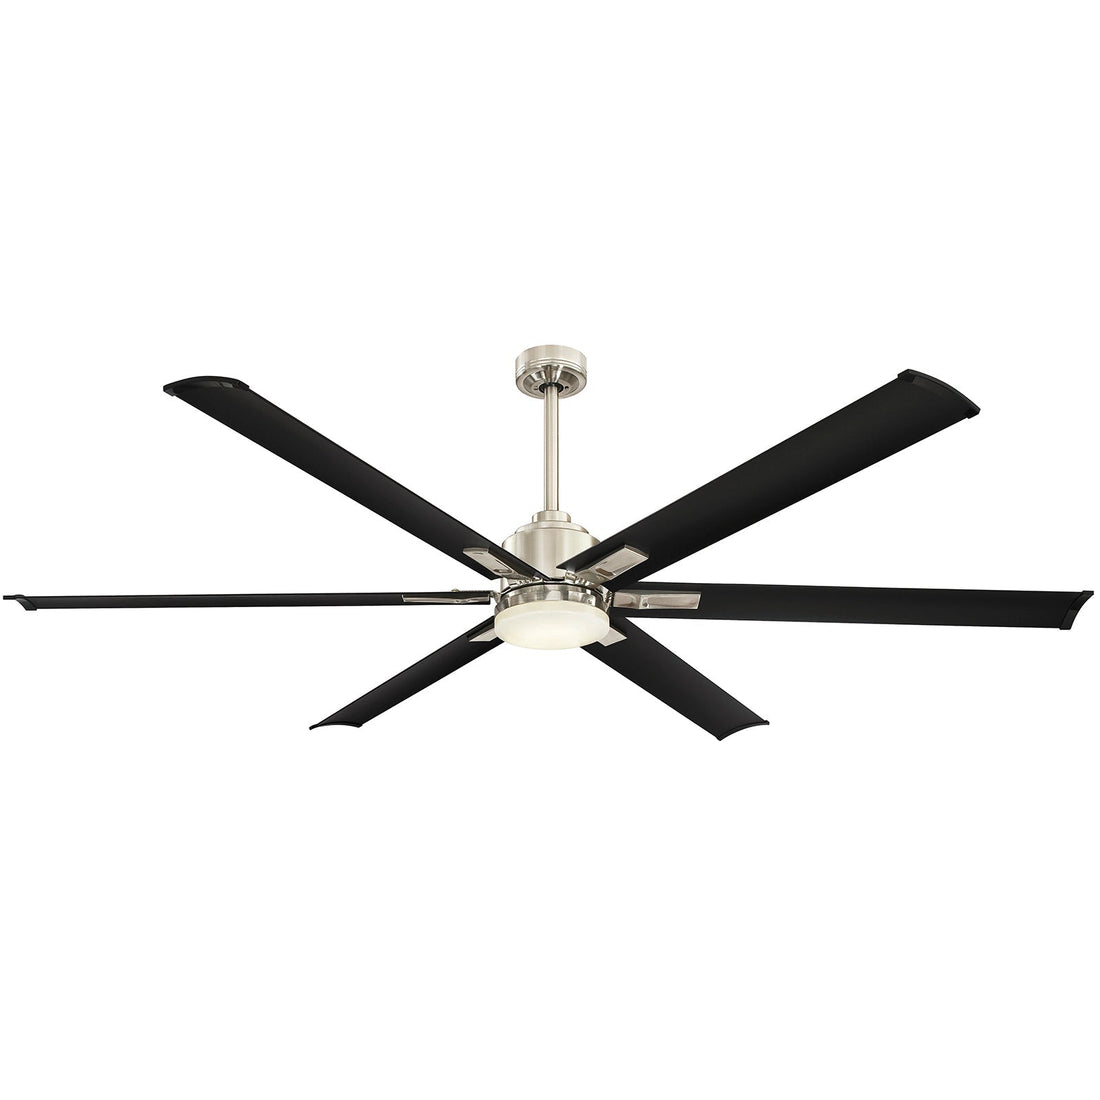 Rhino 1.8m DC Ceiling Fan with LED Light and Remote Mercator